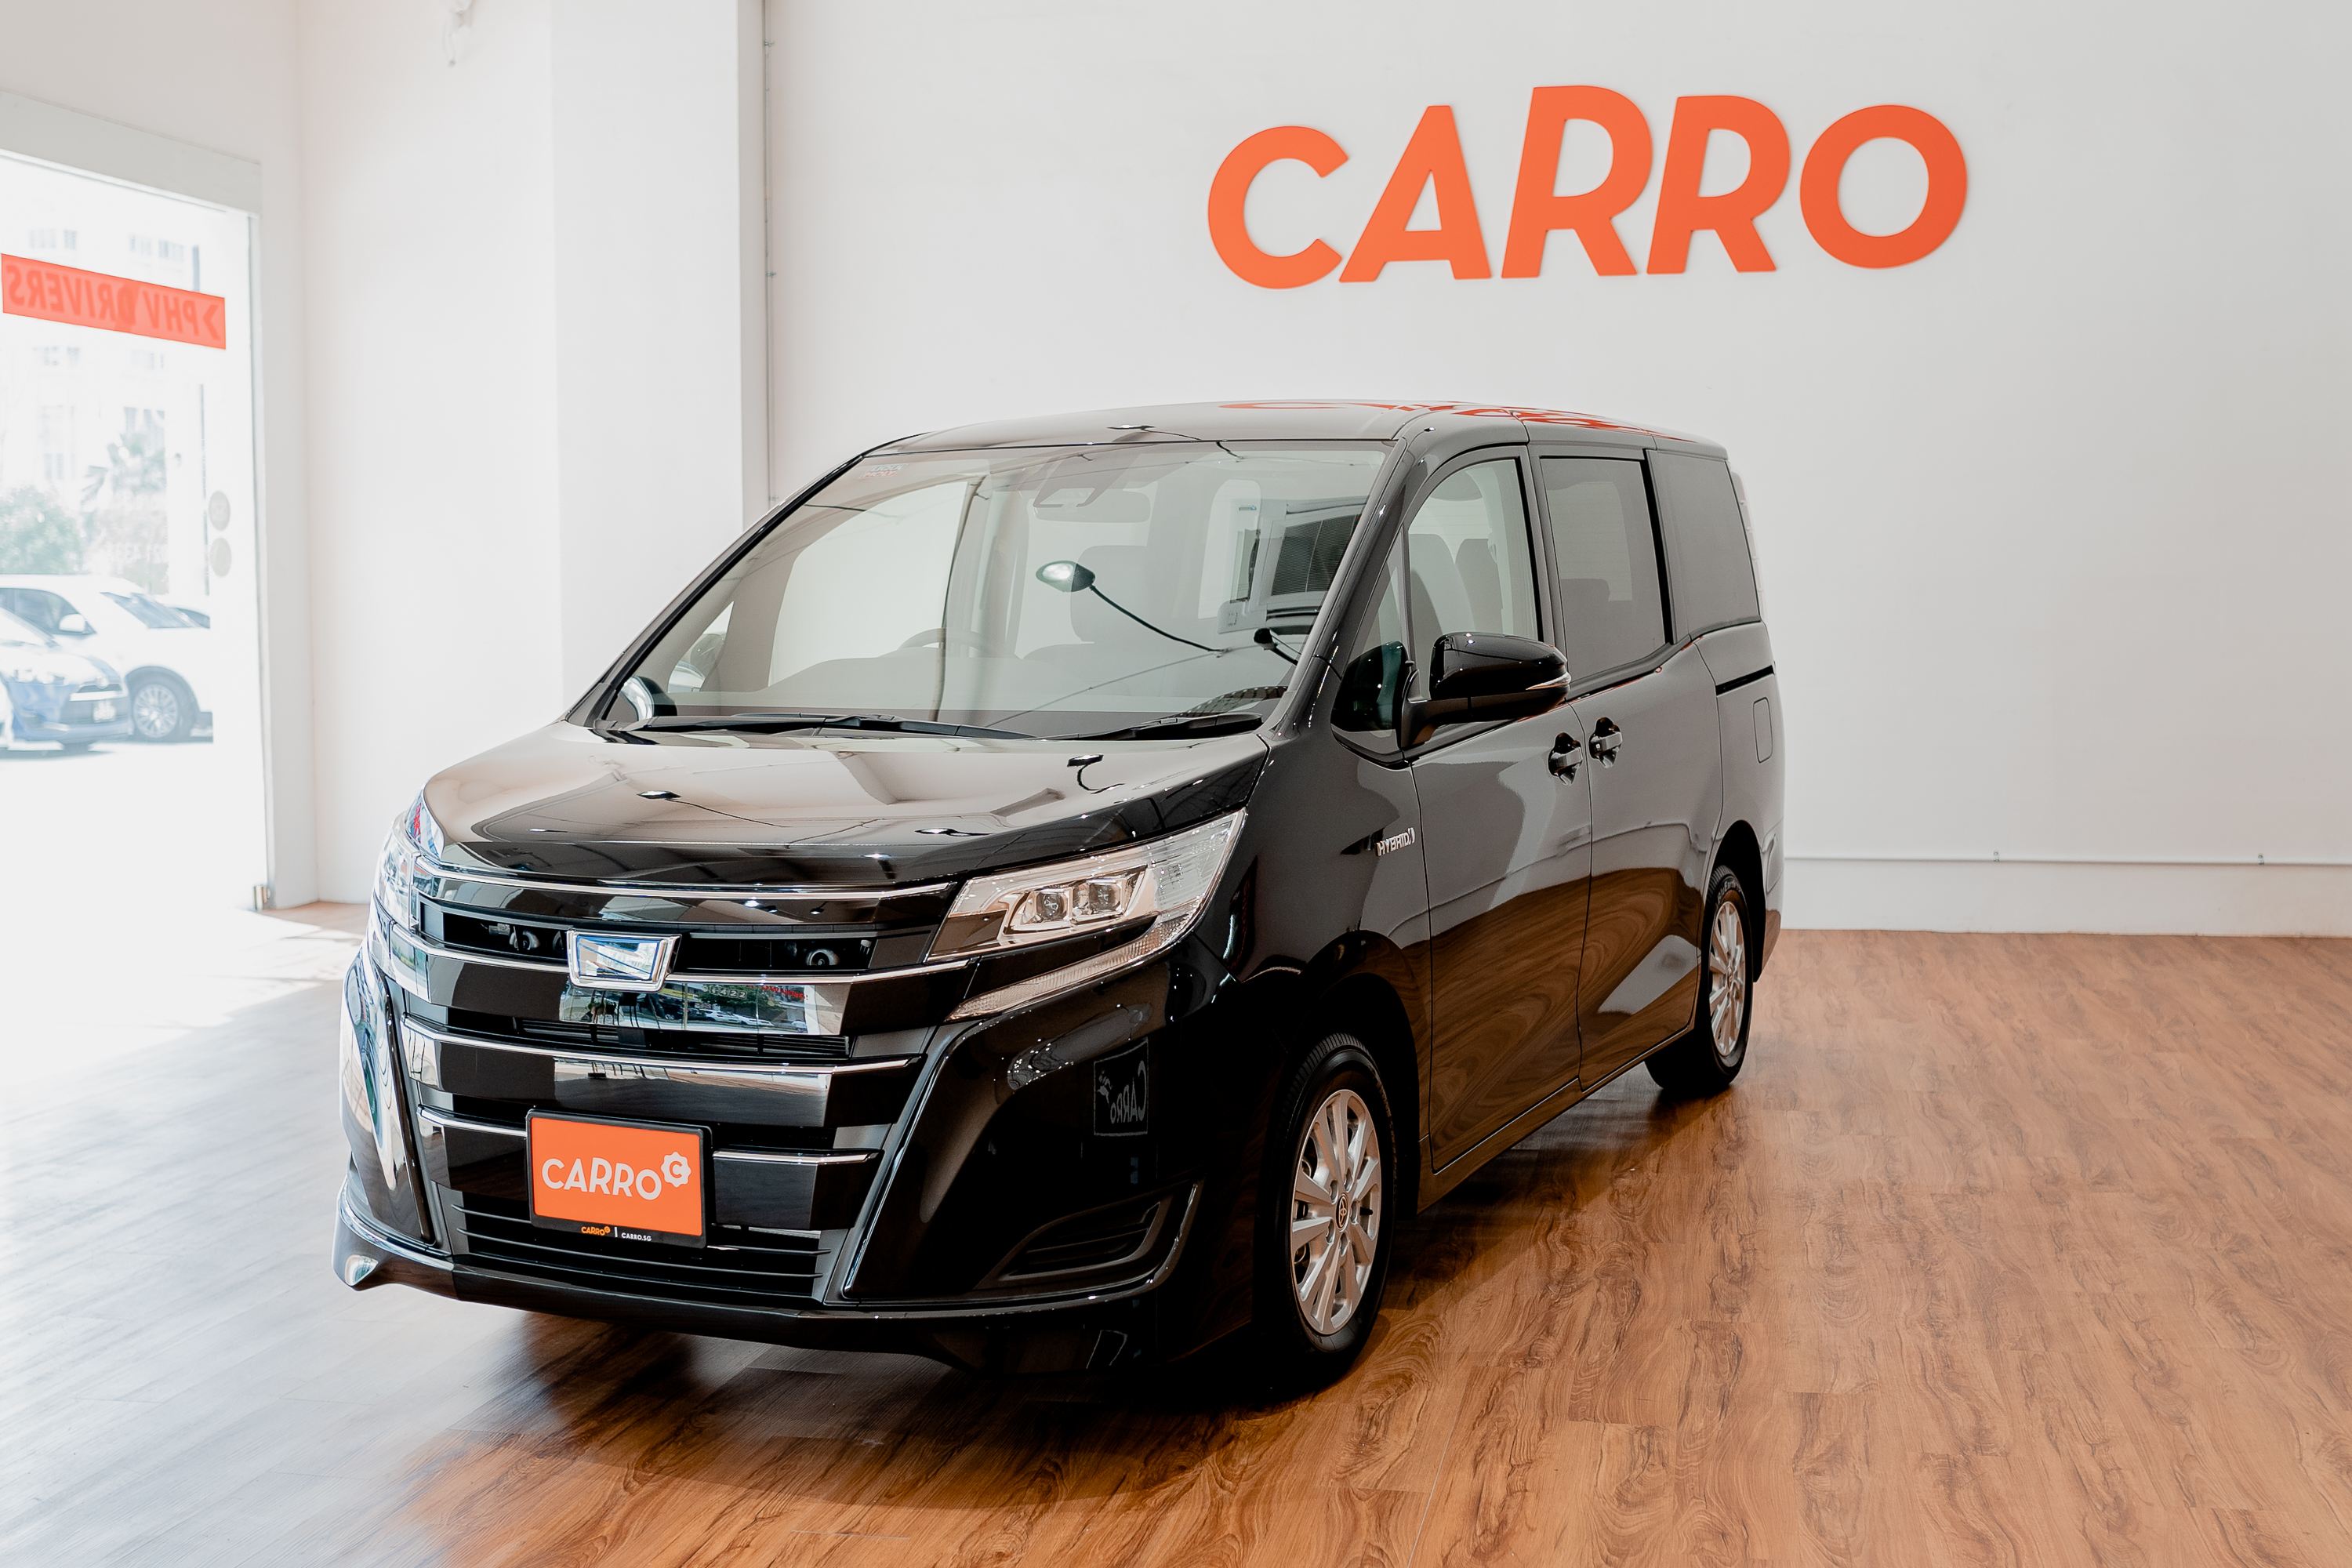 Toyota Noah; One of the 5 affordable cars to consider